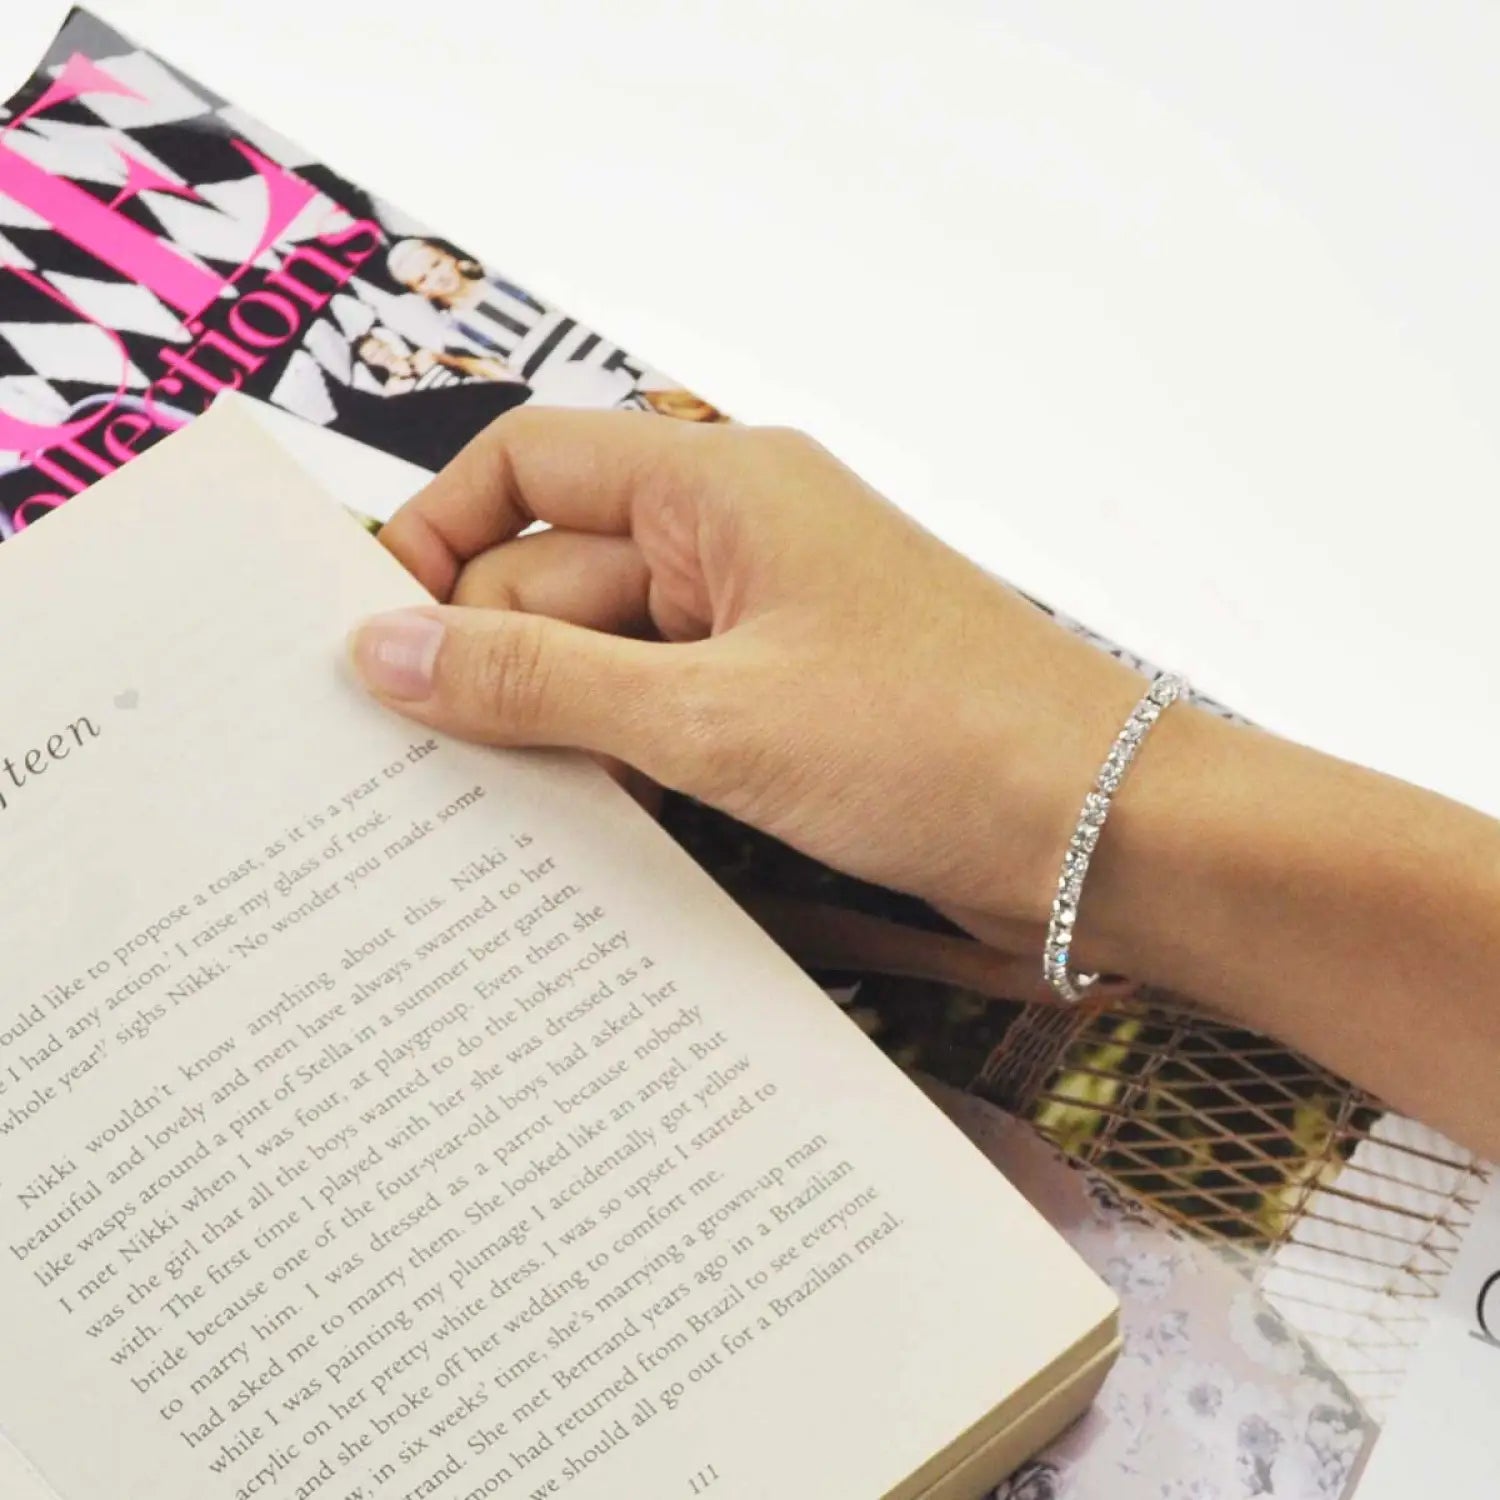 Person holding pink book on Sparkling Stone Cuff - Crystal Diamante Bracelet.